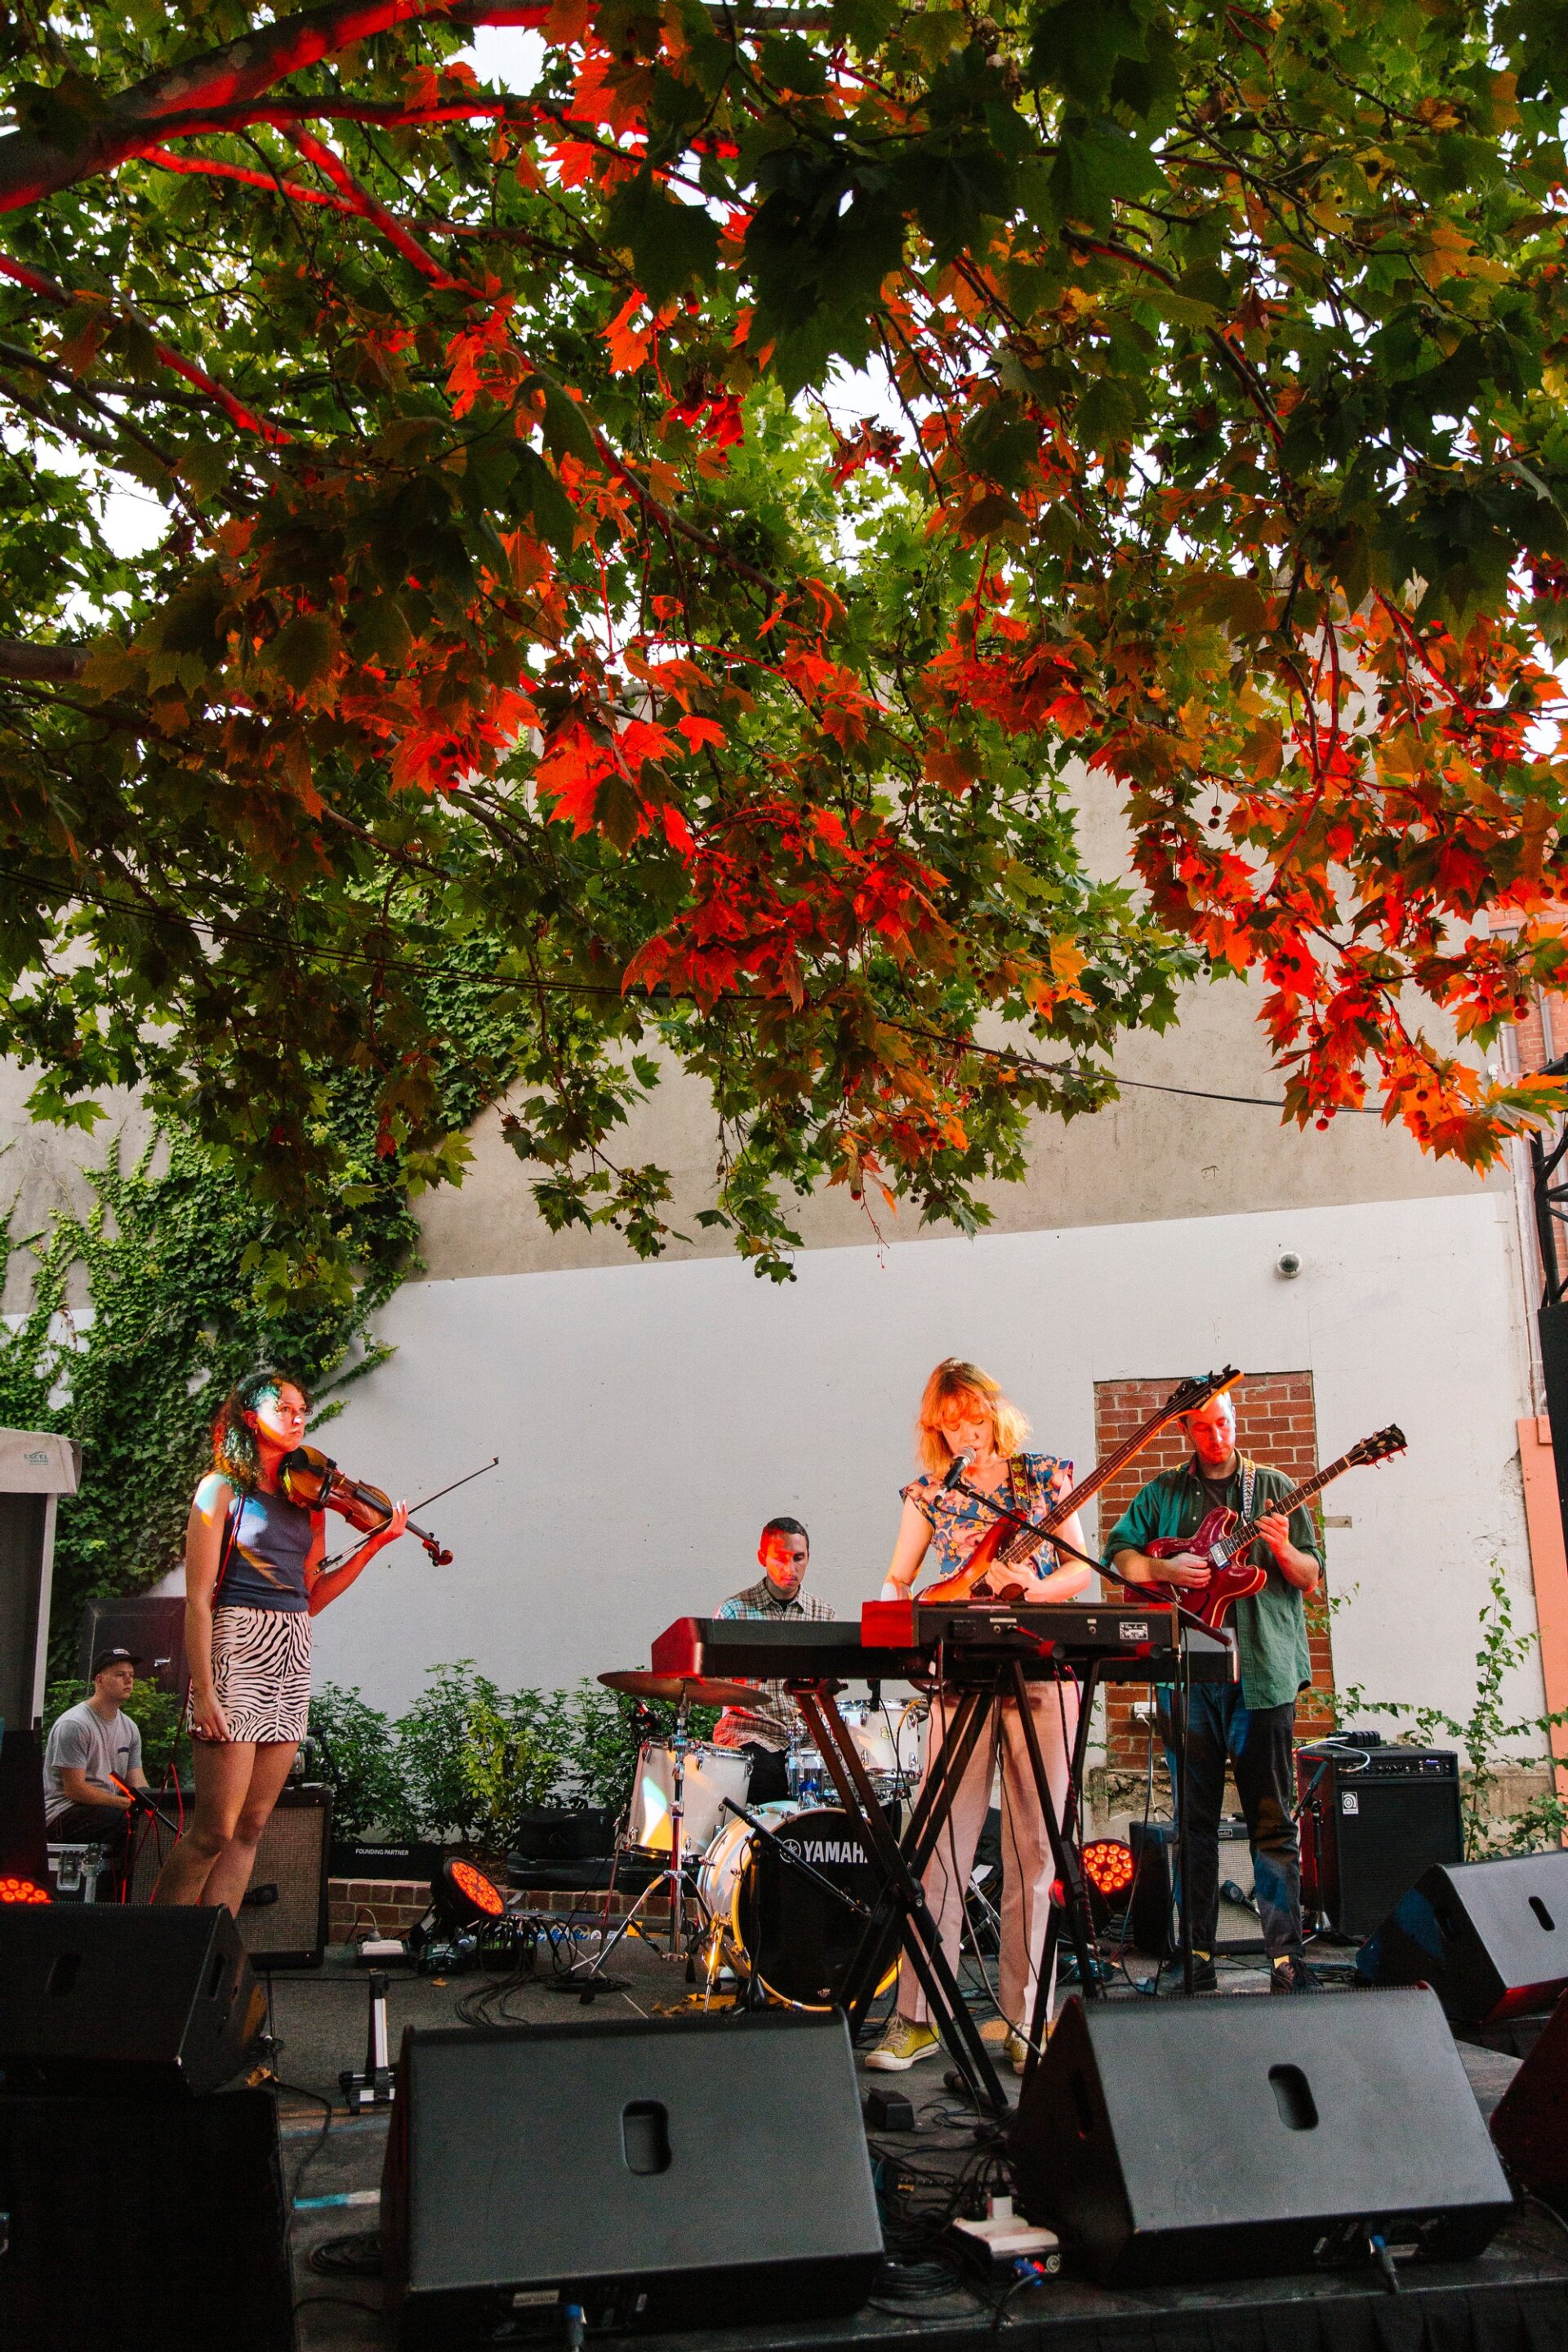 Four musicians performing on an outdoor stage, sheltered by green and orange trees. In front of the musicians are speakers and equipment.